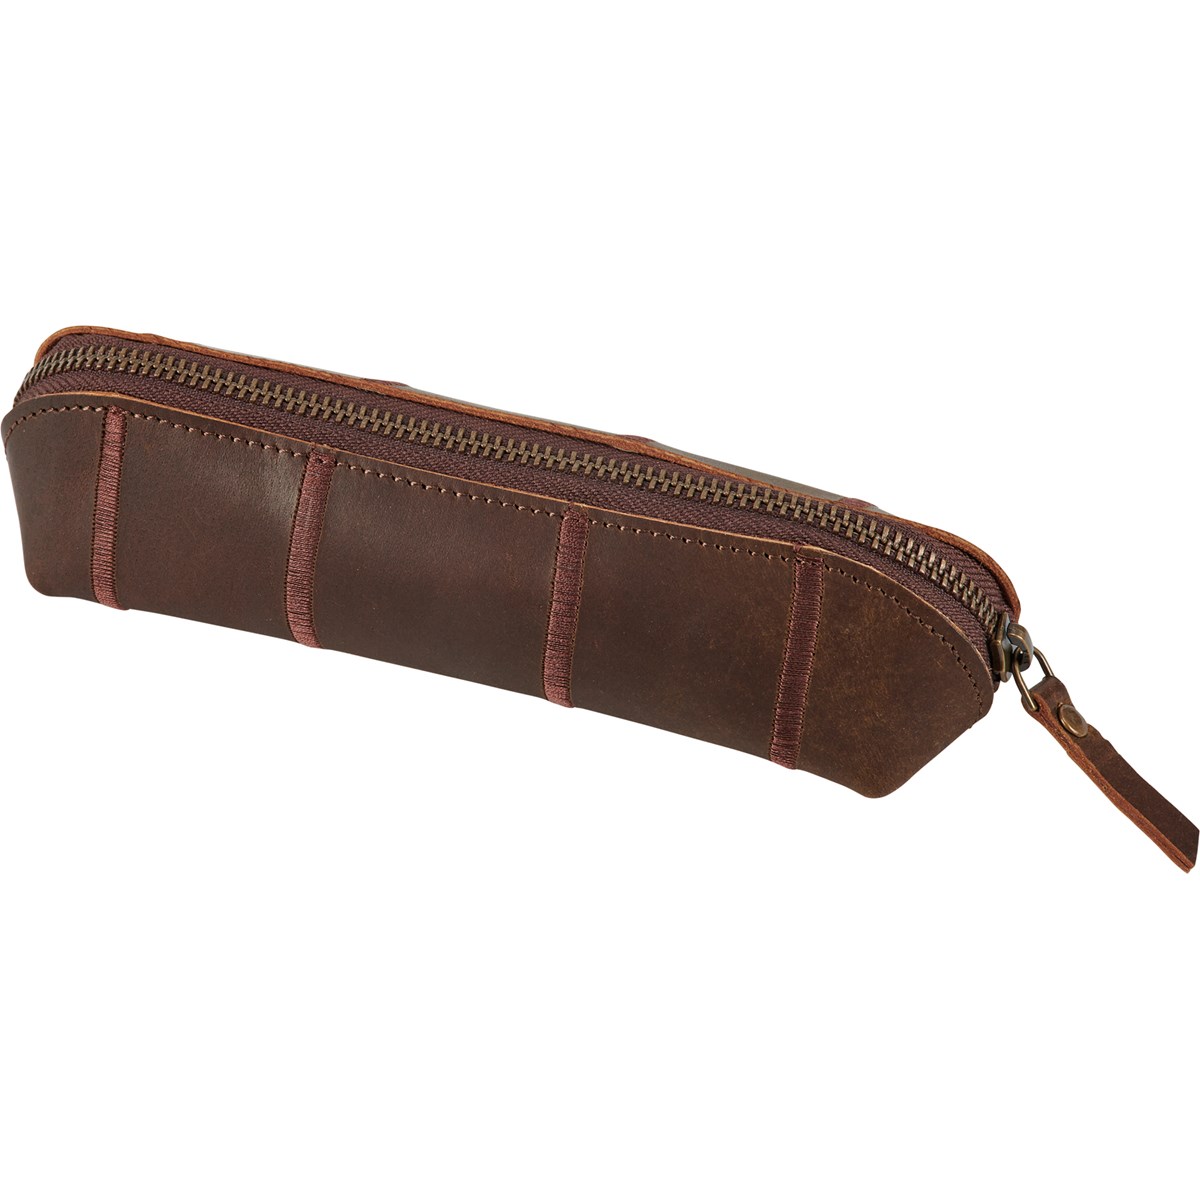 Tanned Leather Pencil Pouch - Leather, Metal